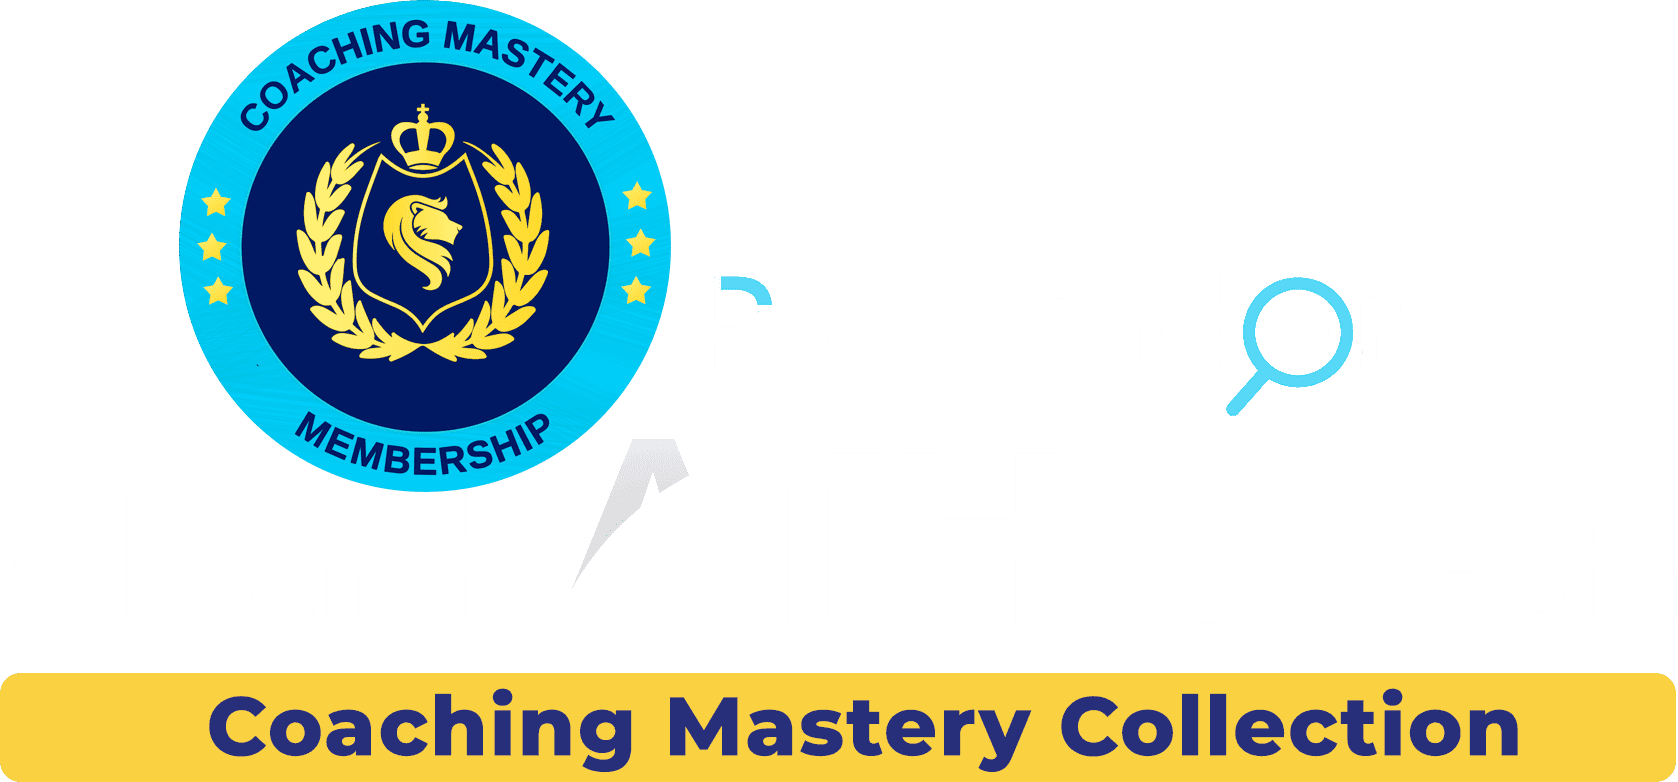 coaching-mastery-collection-title2